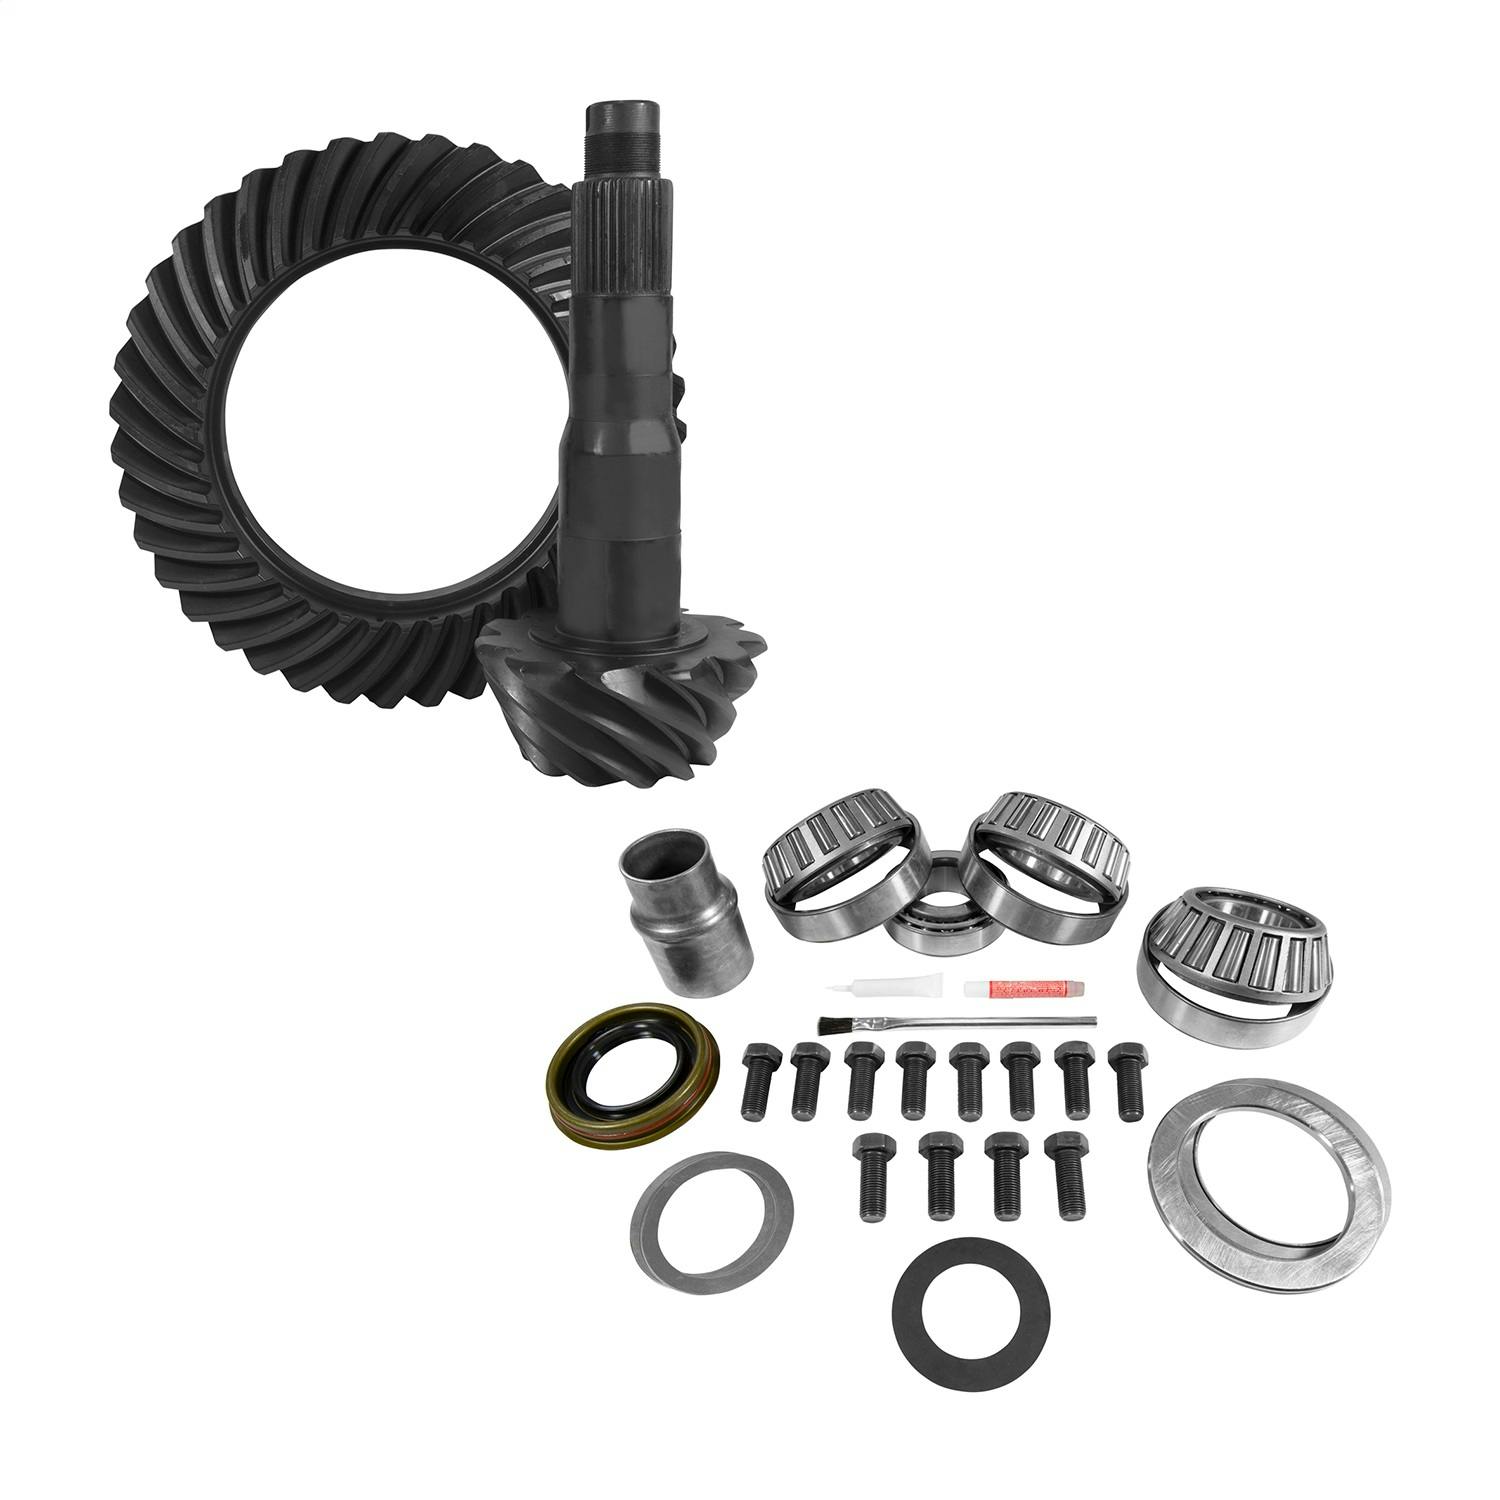 USA Standard Gear ZGK2147 10.5in. Ford 3.73 Rear Ring/Pinion and Install Kit